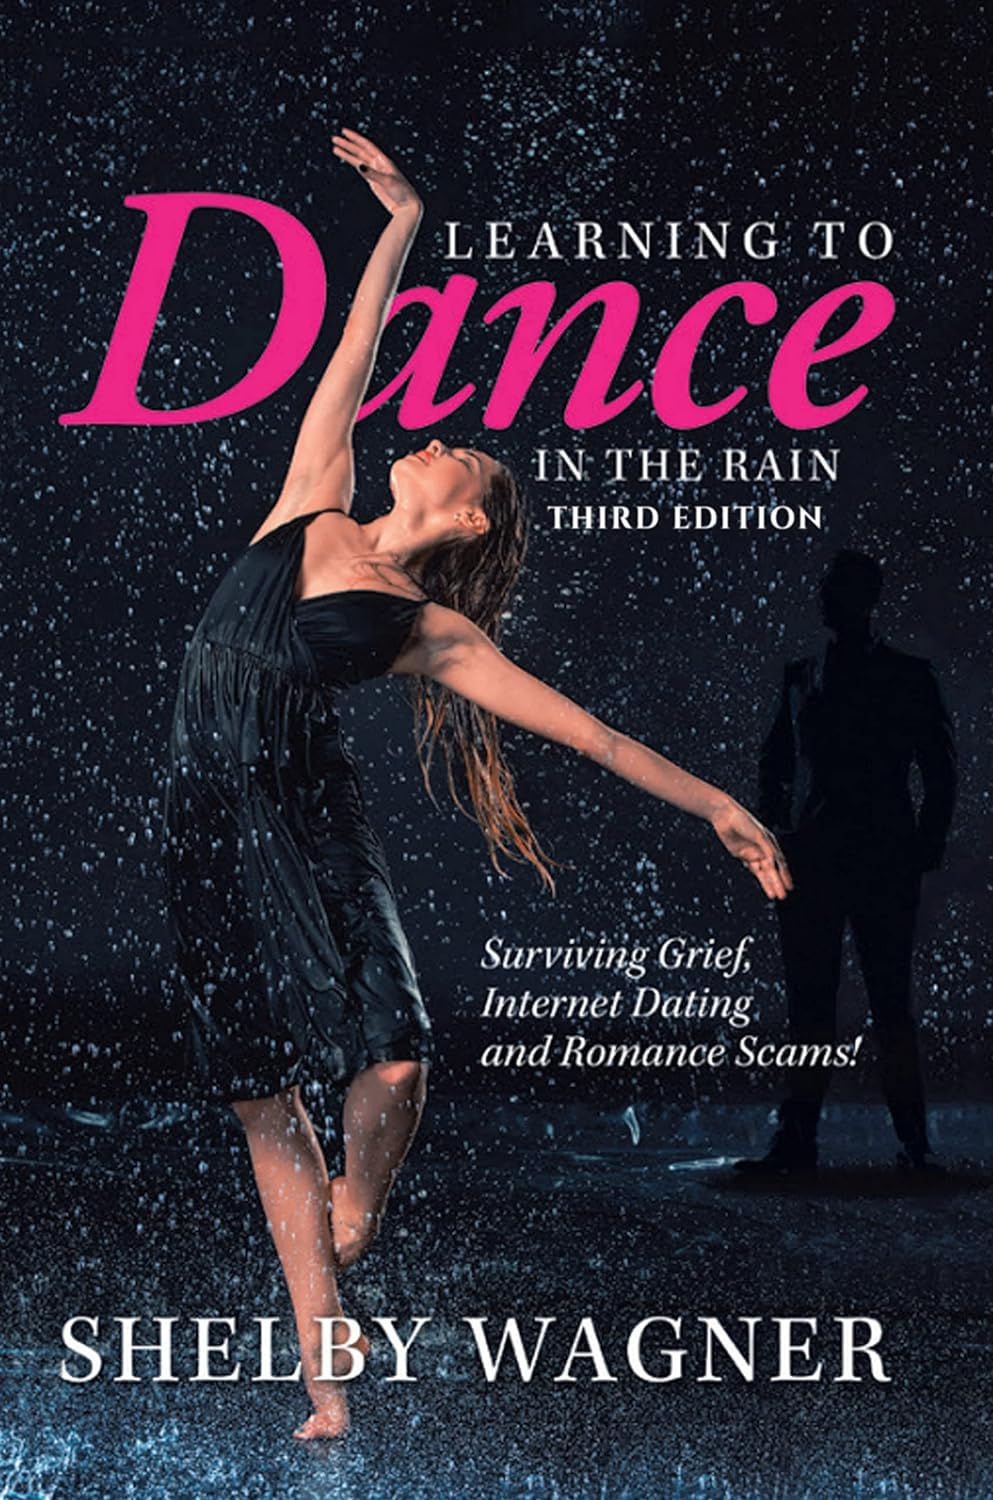 Author's Tranquility Press: Explore the Journey of Healing and Resilience in "Learning to Dance in the Rain Third Edition" by Shelby Wagner